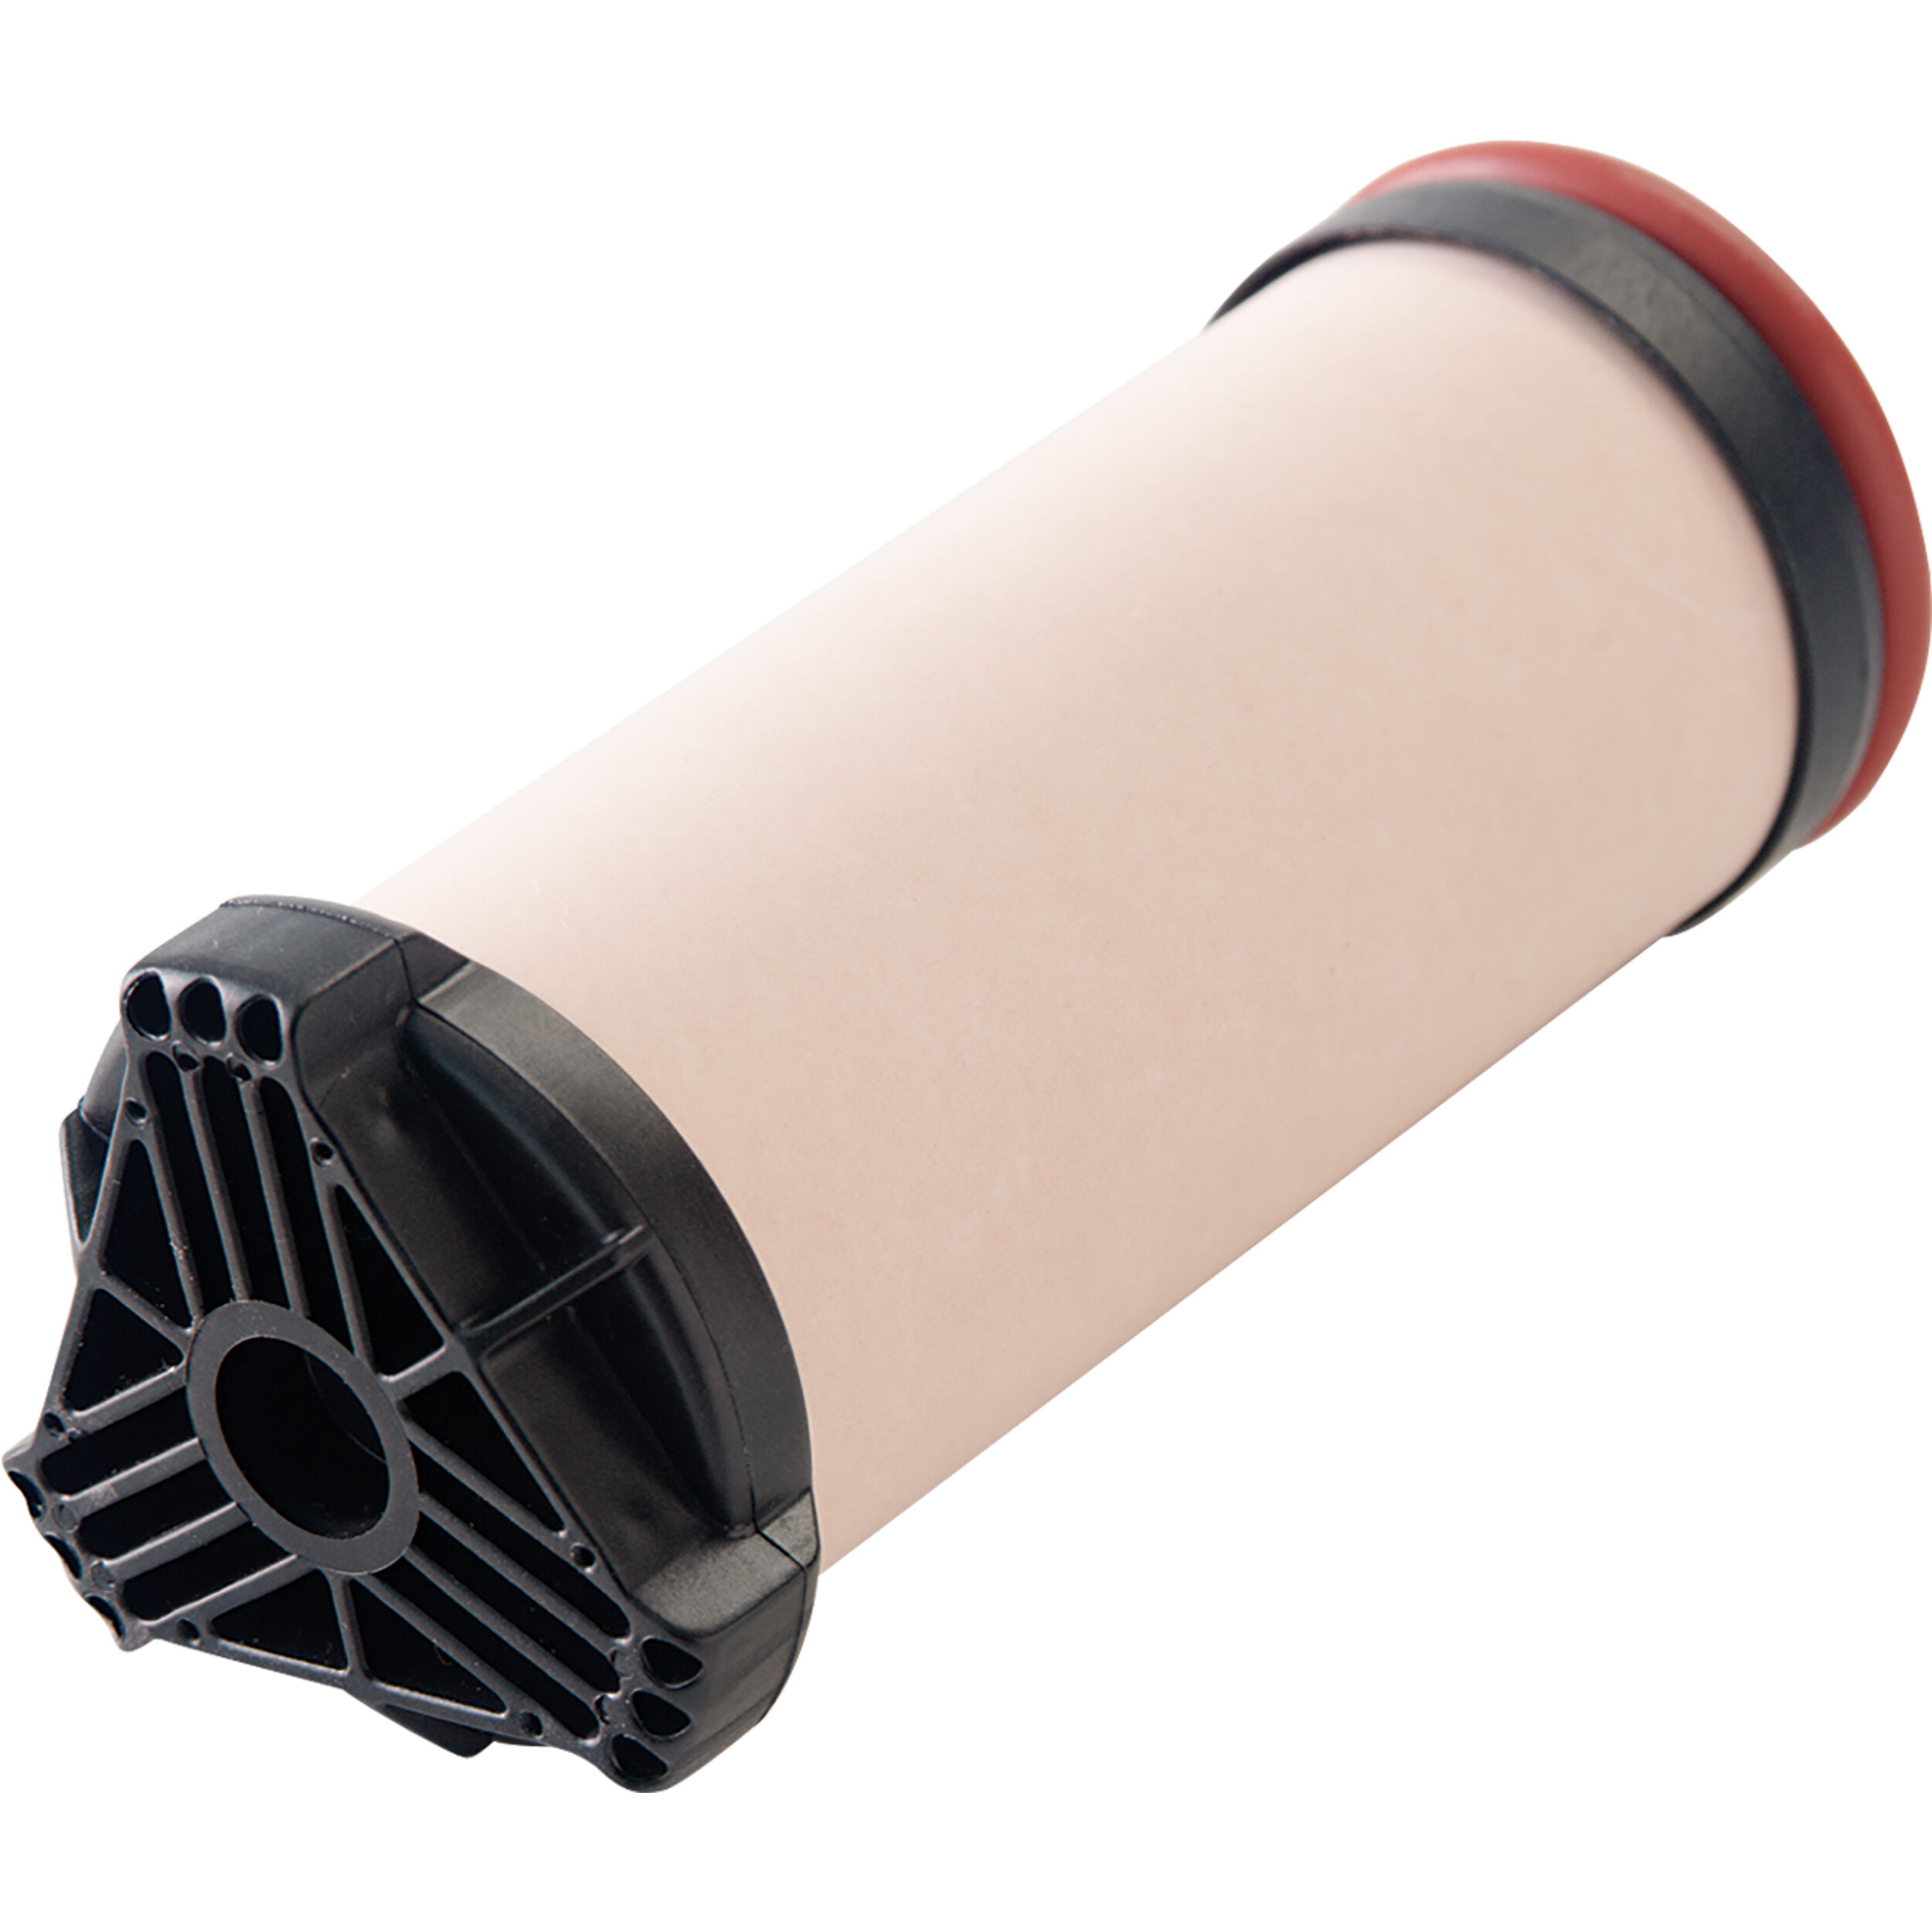 Water Treatment Accessories for Filters & Purifiers | MSR